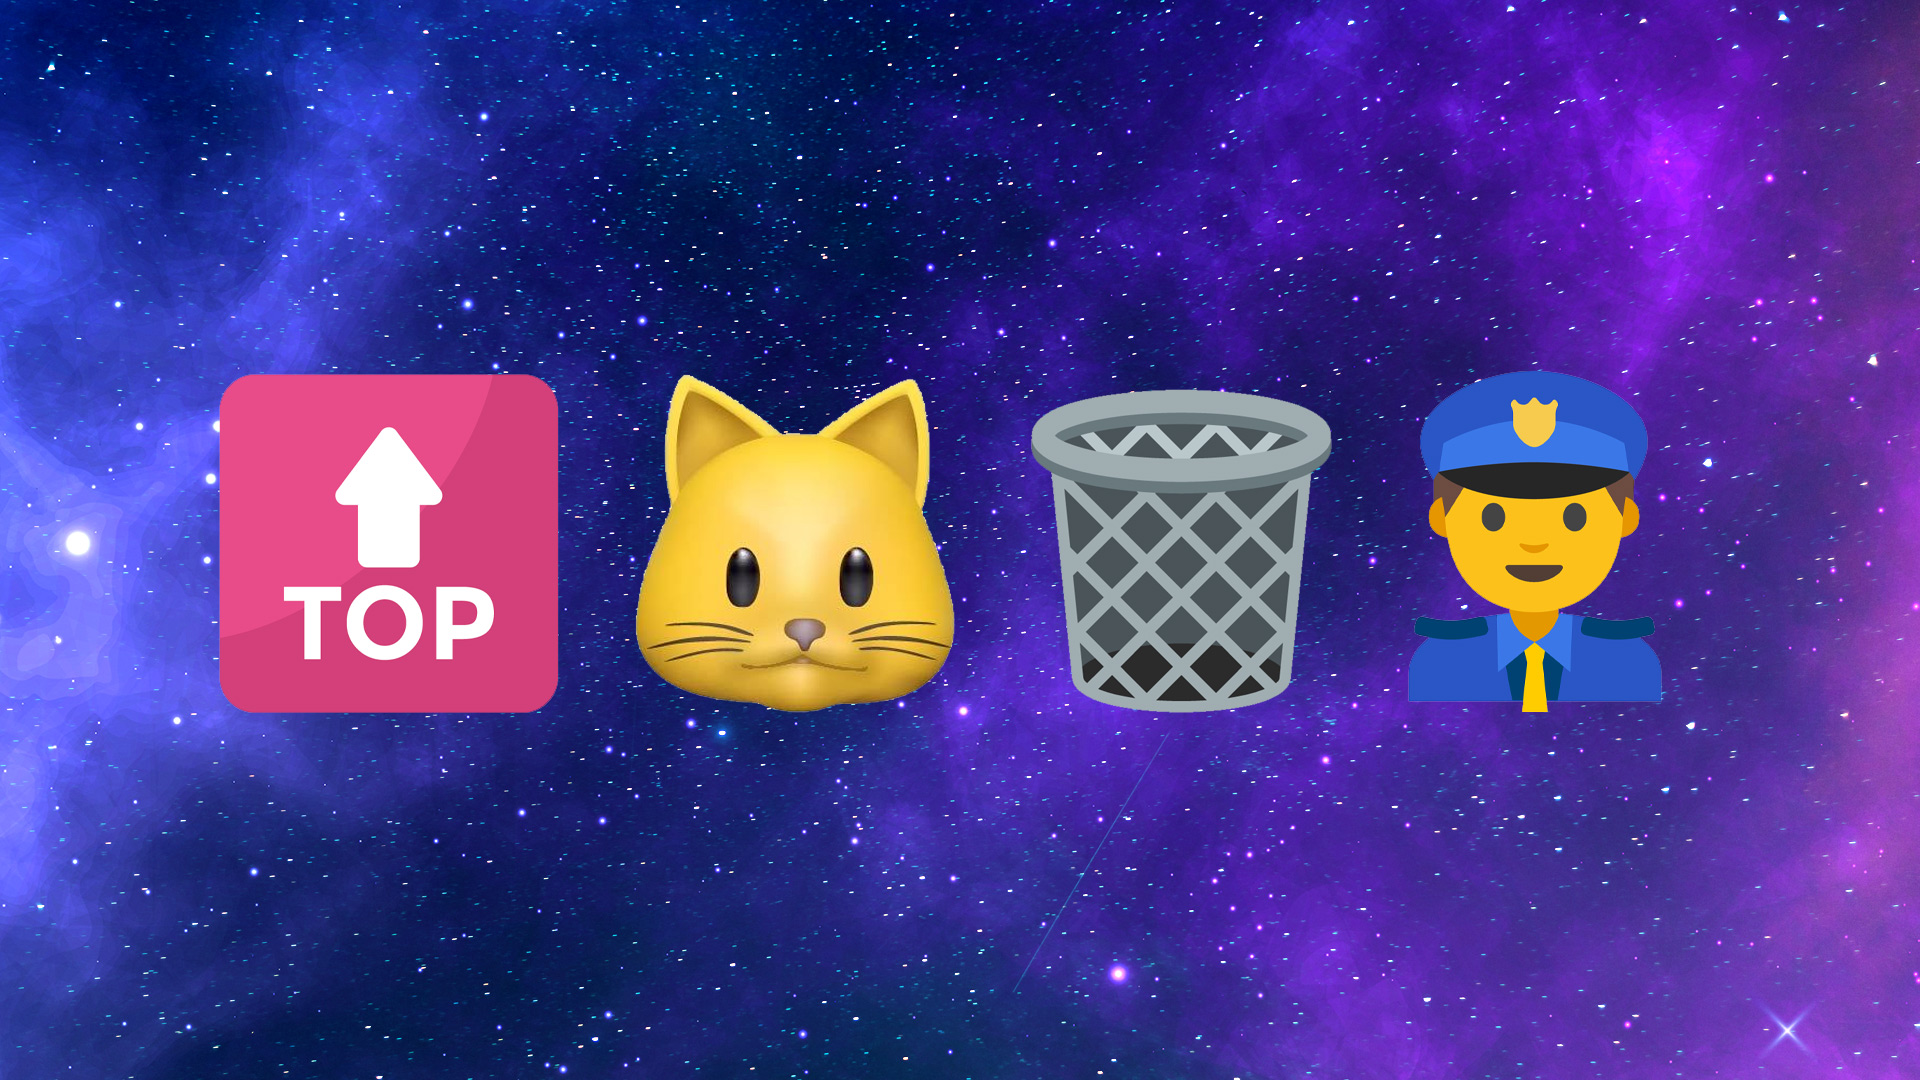 Emojis: sign with an arrow pointing upwards, a cat emoji, a waste paper basket and a police officer